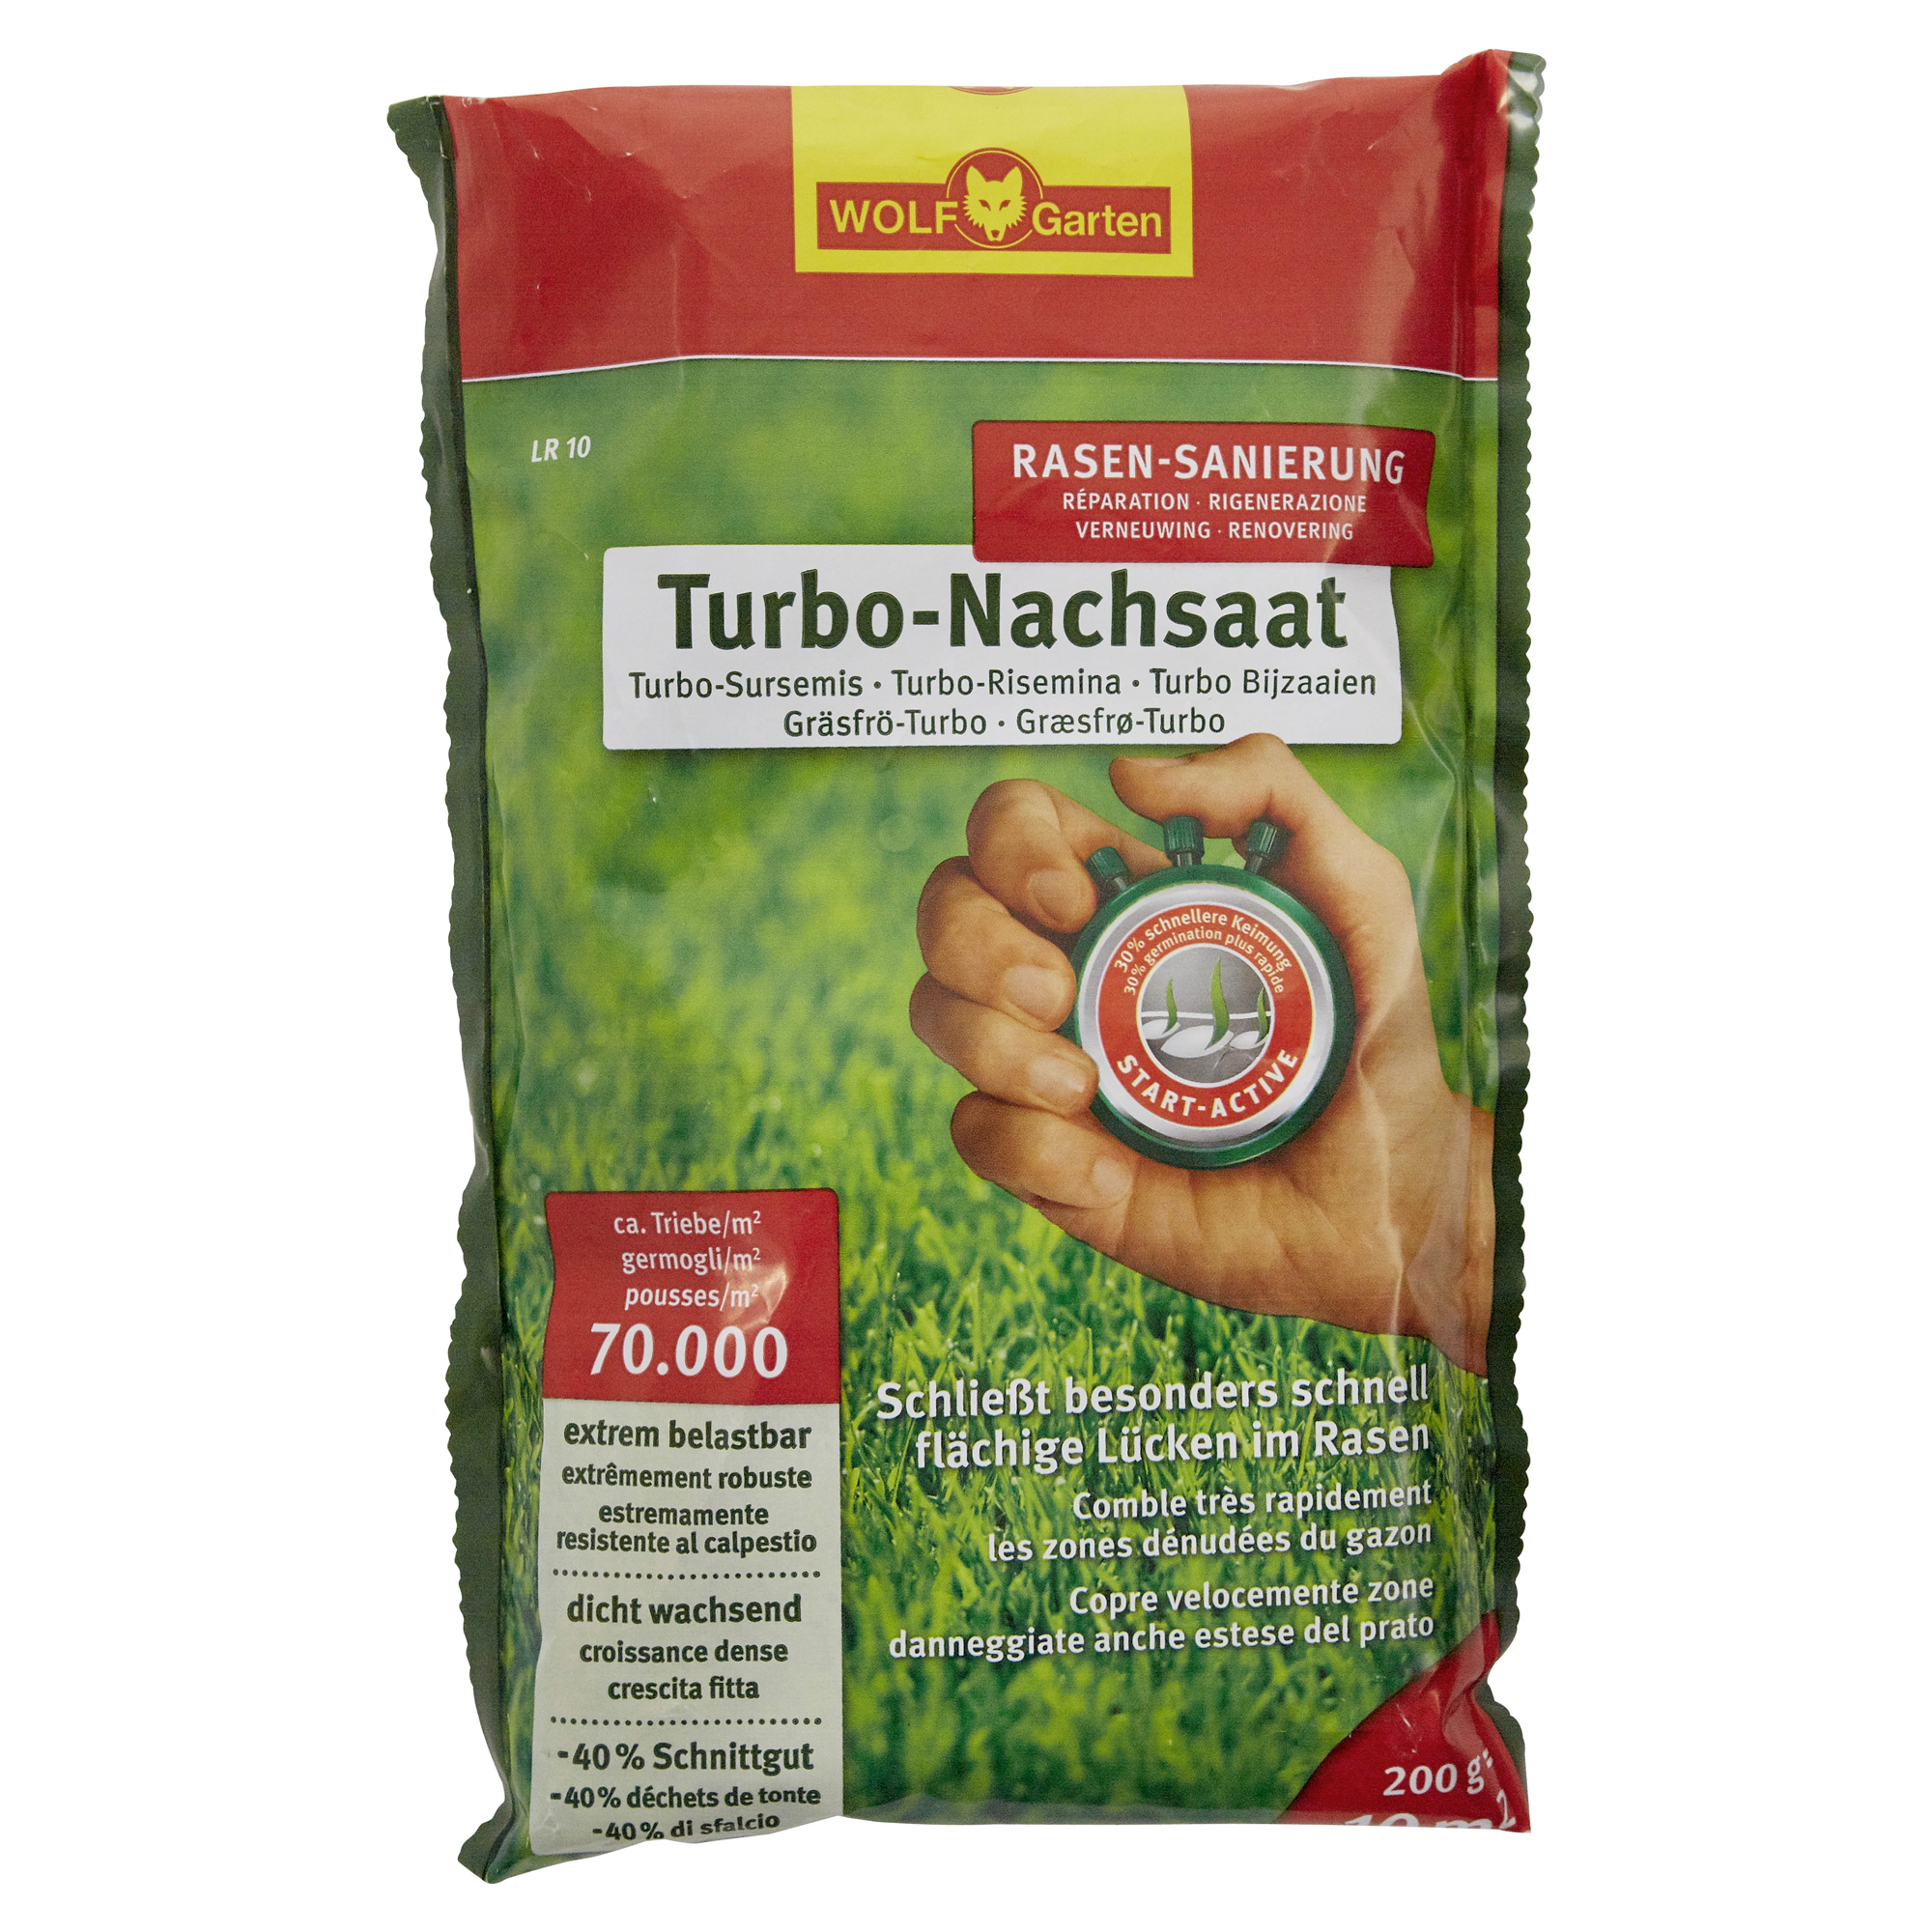 Turbo-Nachsaat 10 m² 200 g + product picture